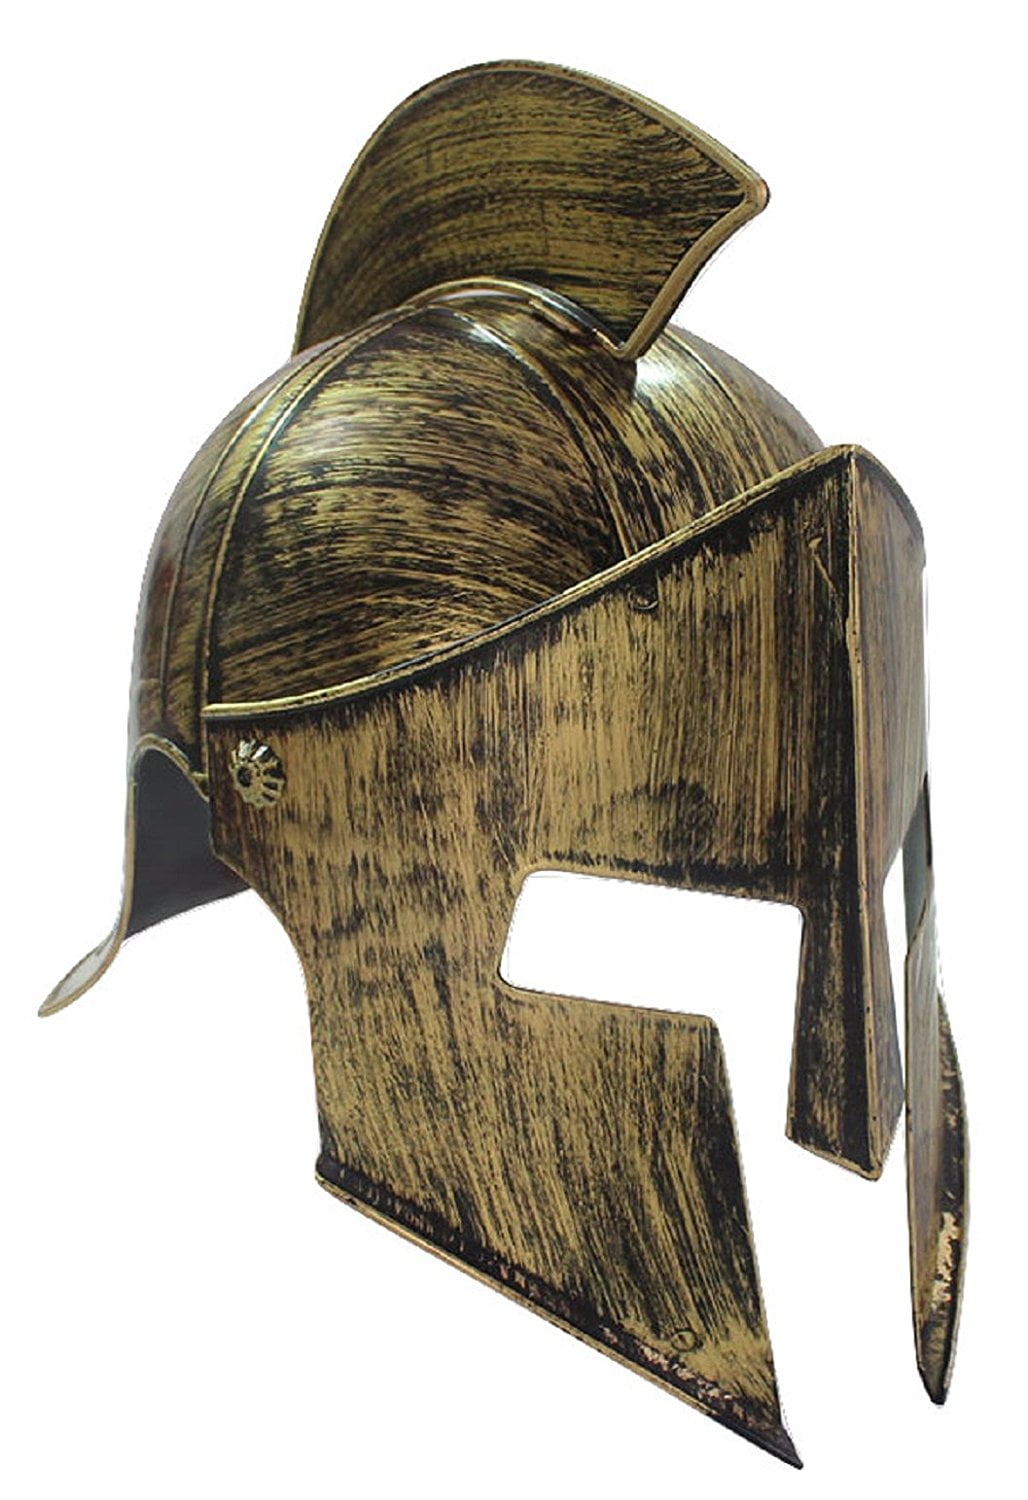 Medieval Spectacle Viking Armor Helmet Halloween Costume Silver+Exp Shipping. 